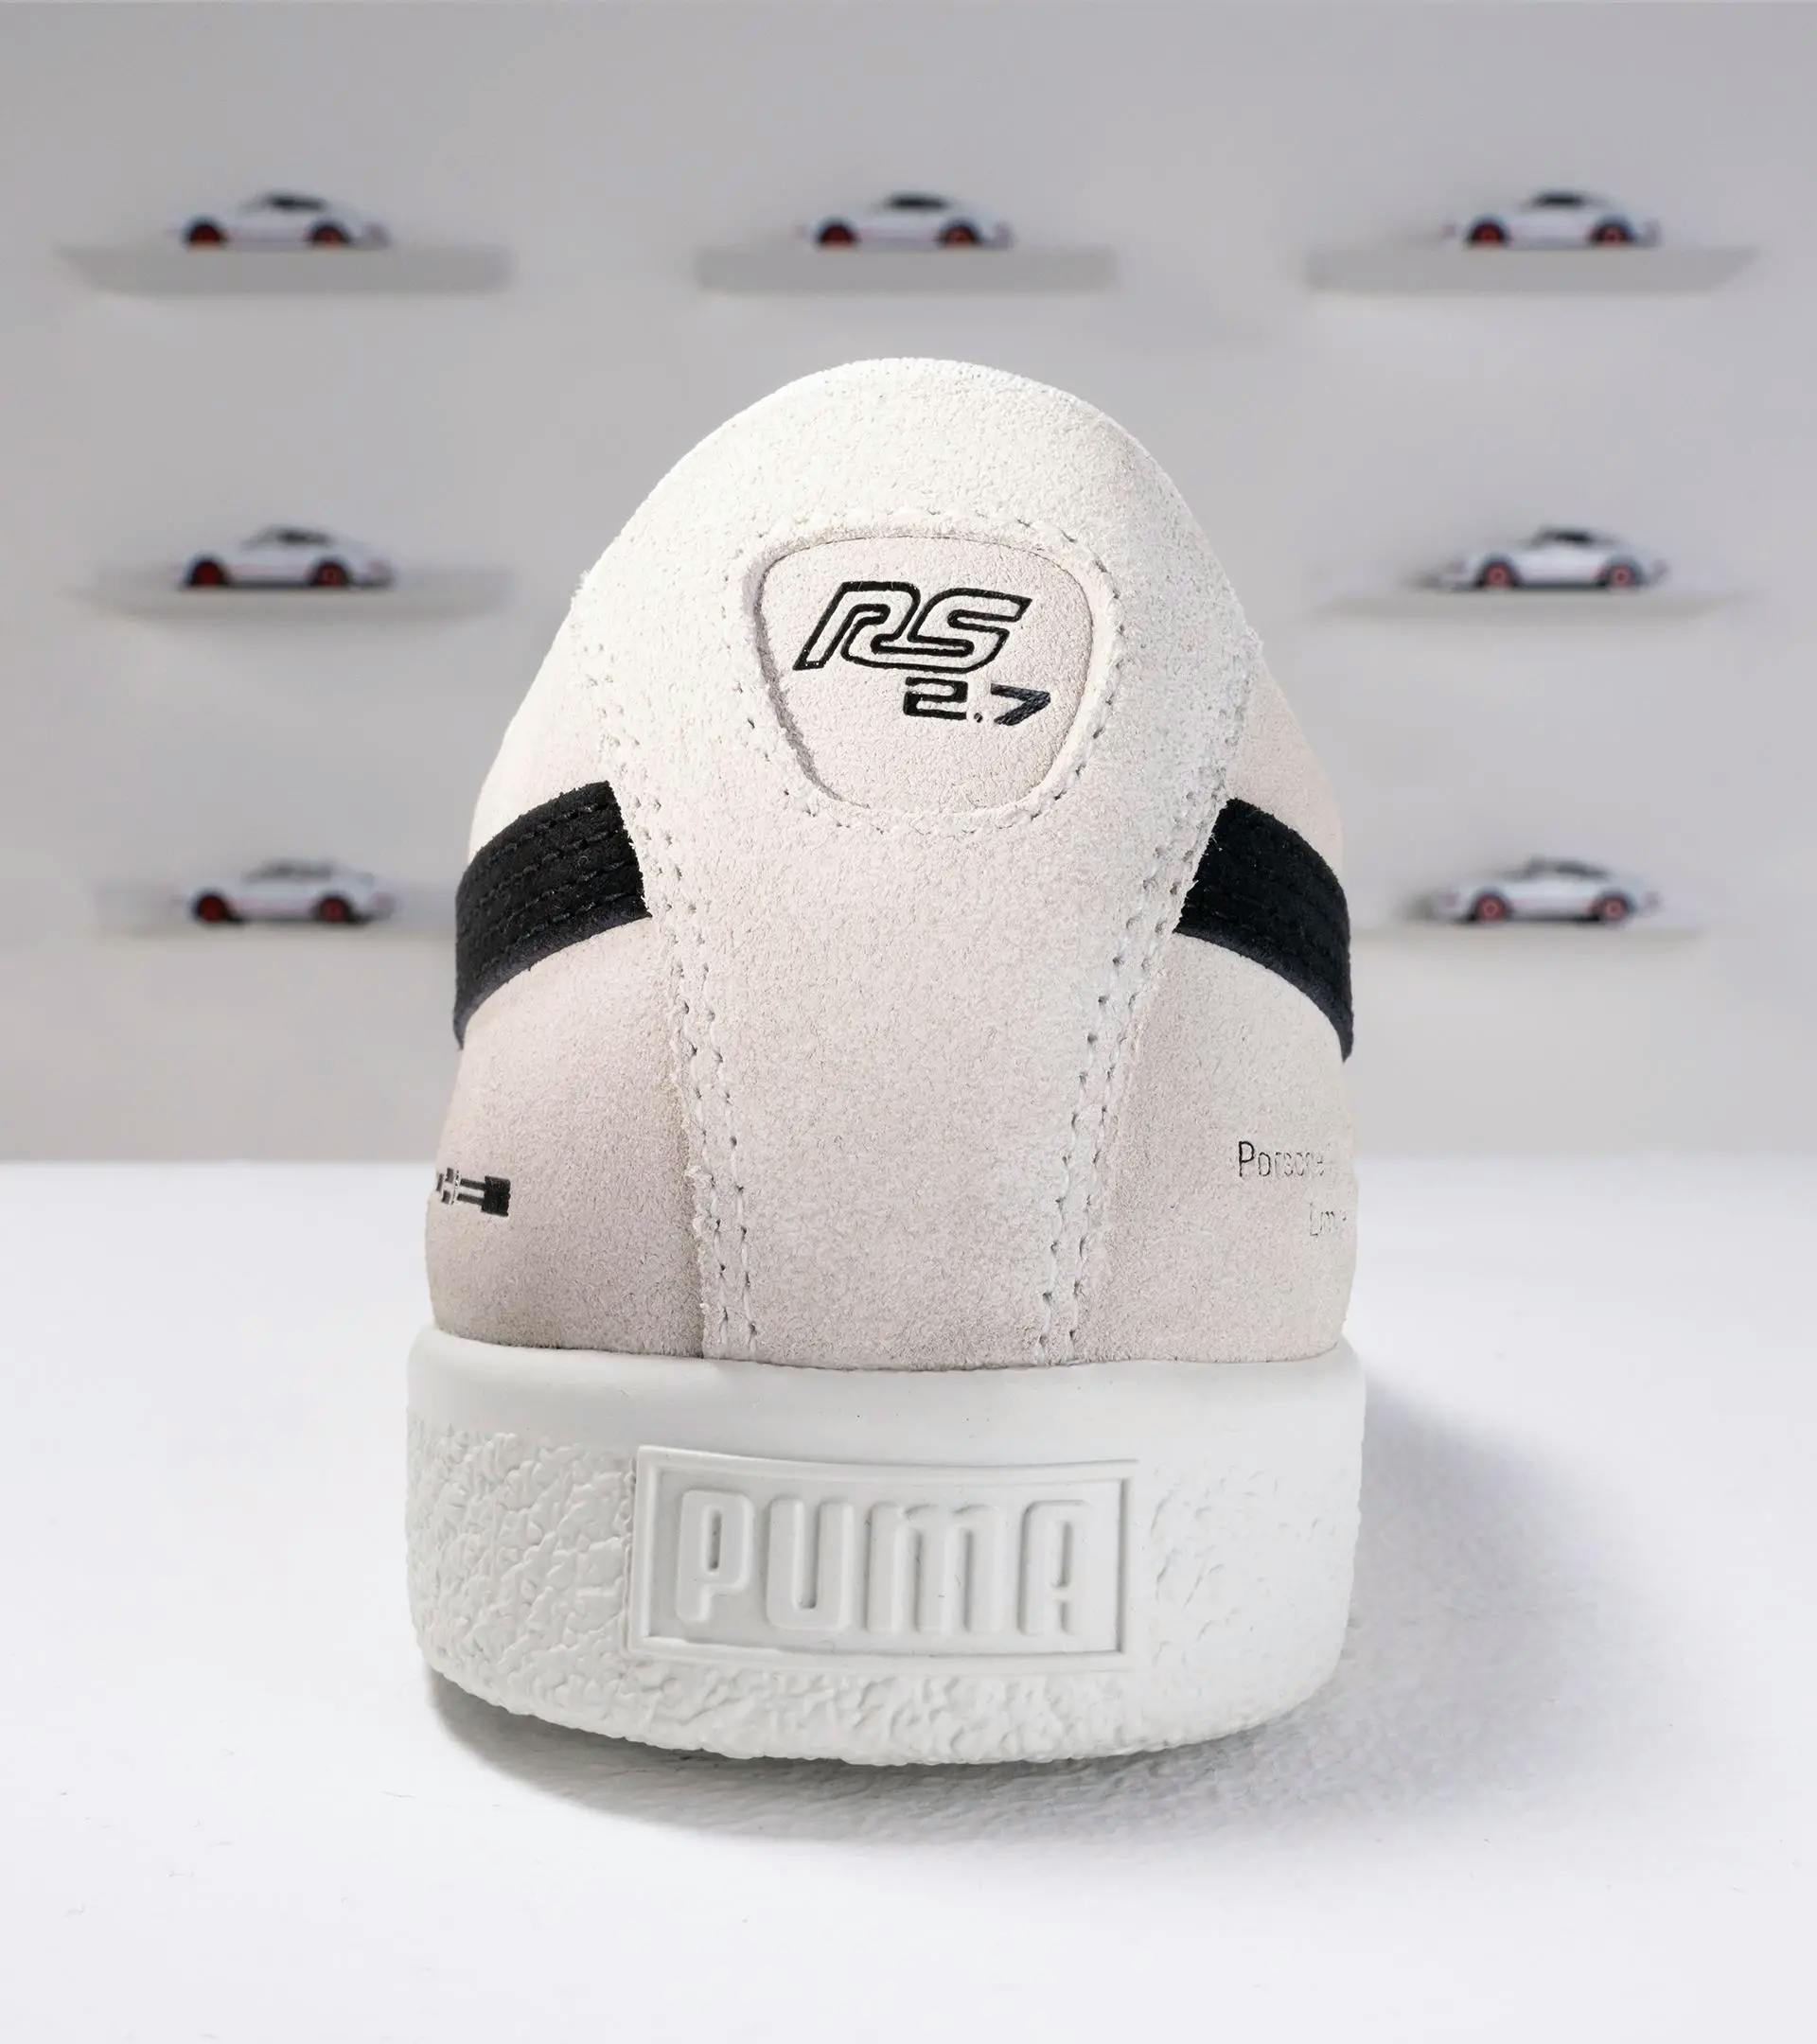 Porsche Pop Sports Sneaker Fans Car Gift Clunky Shoes For Men And Women  White - Freedomdesign